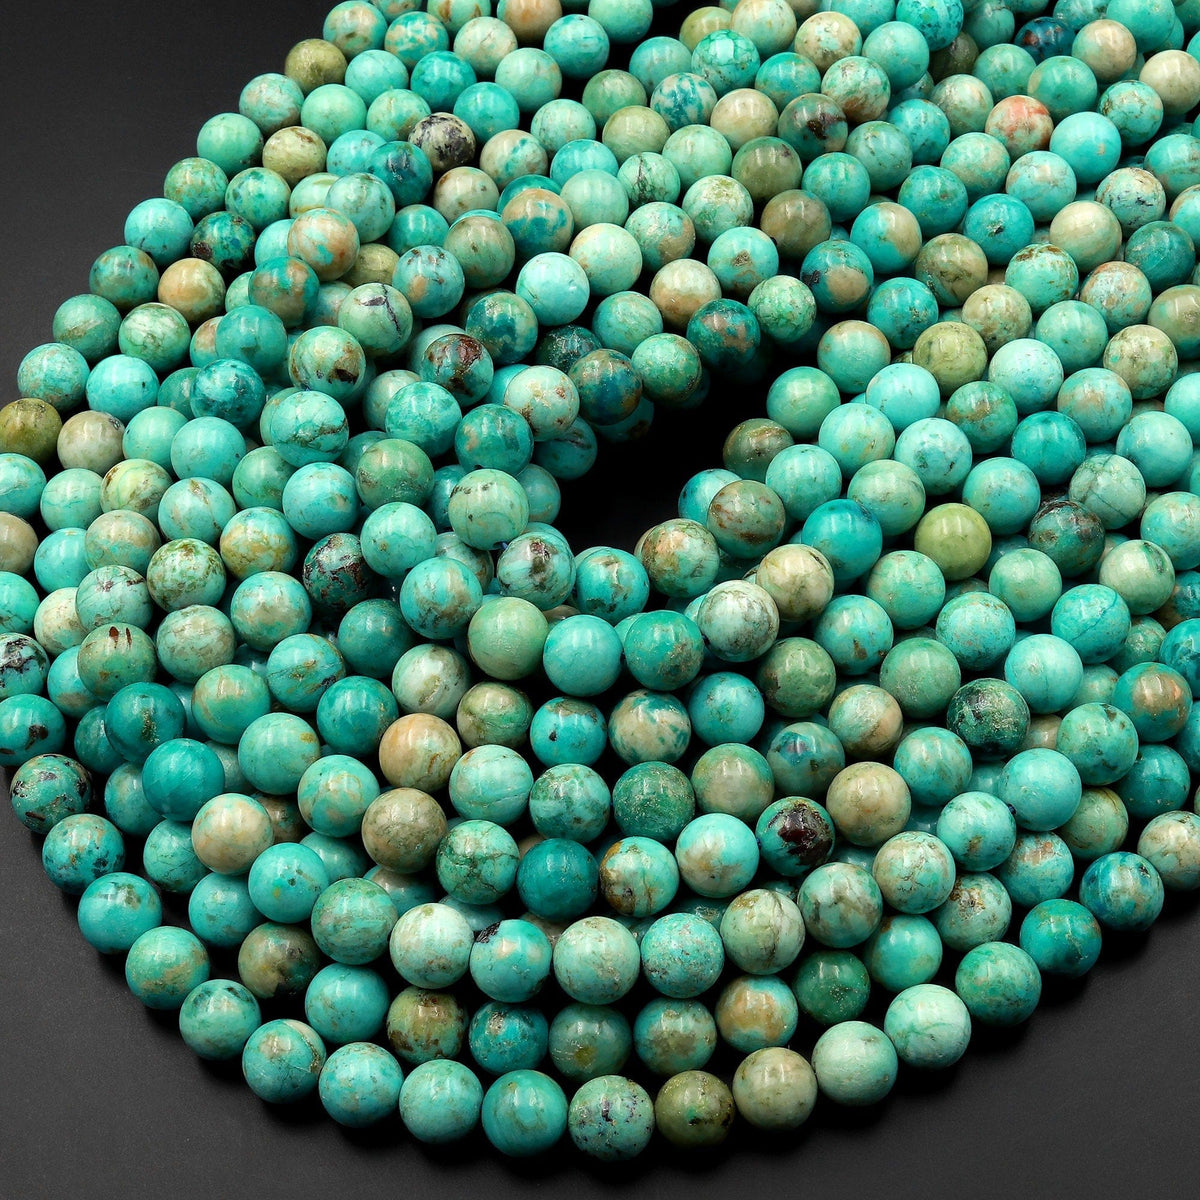 FANGQUN Natural Turquoise Beads for Jewelry Making Loose Stone Beads for  Bracelets Necklaces Earrings Green Turquoise Jewelry Beads Bulk, 60pcs 6mm